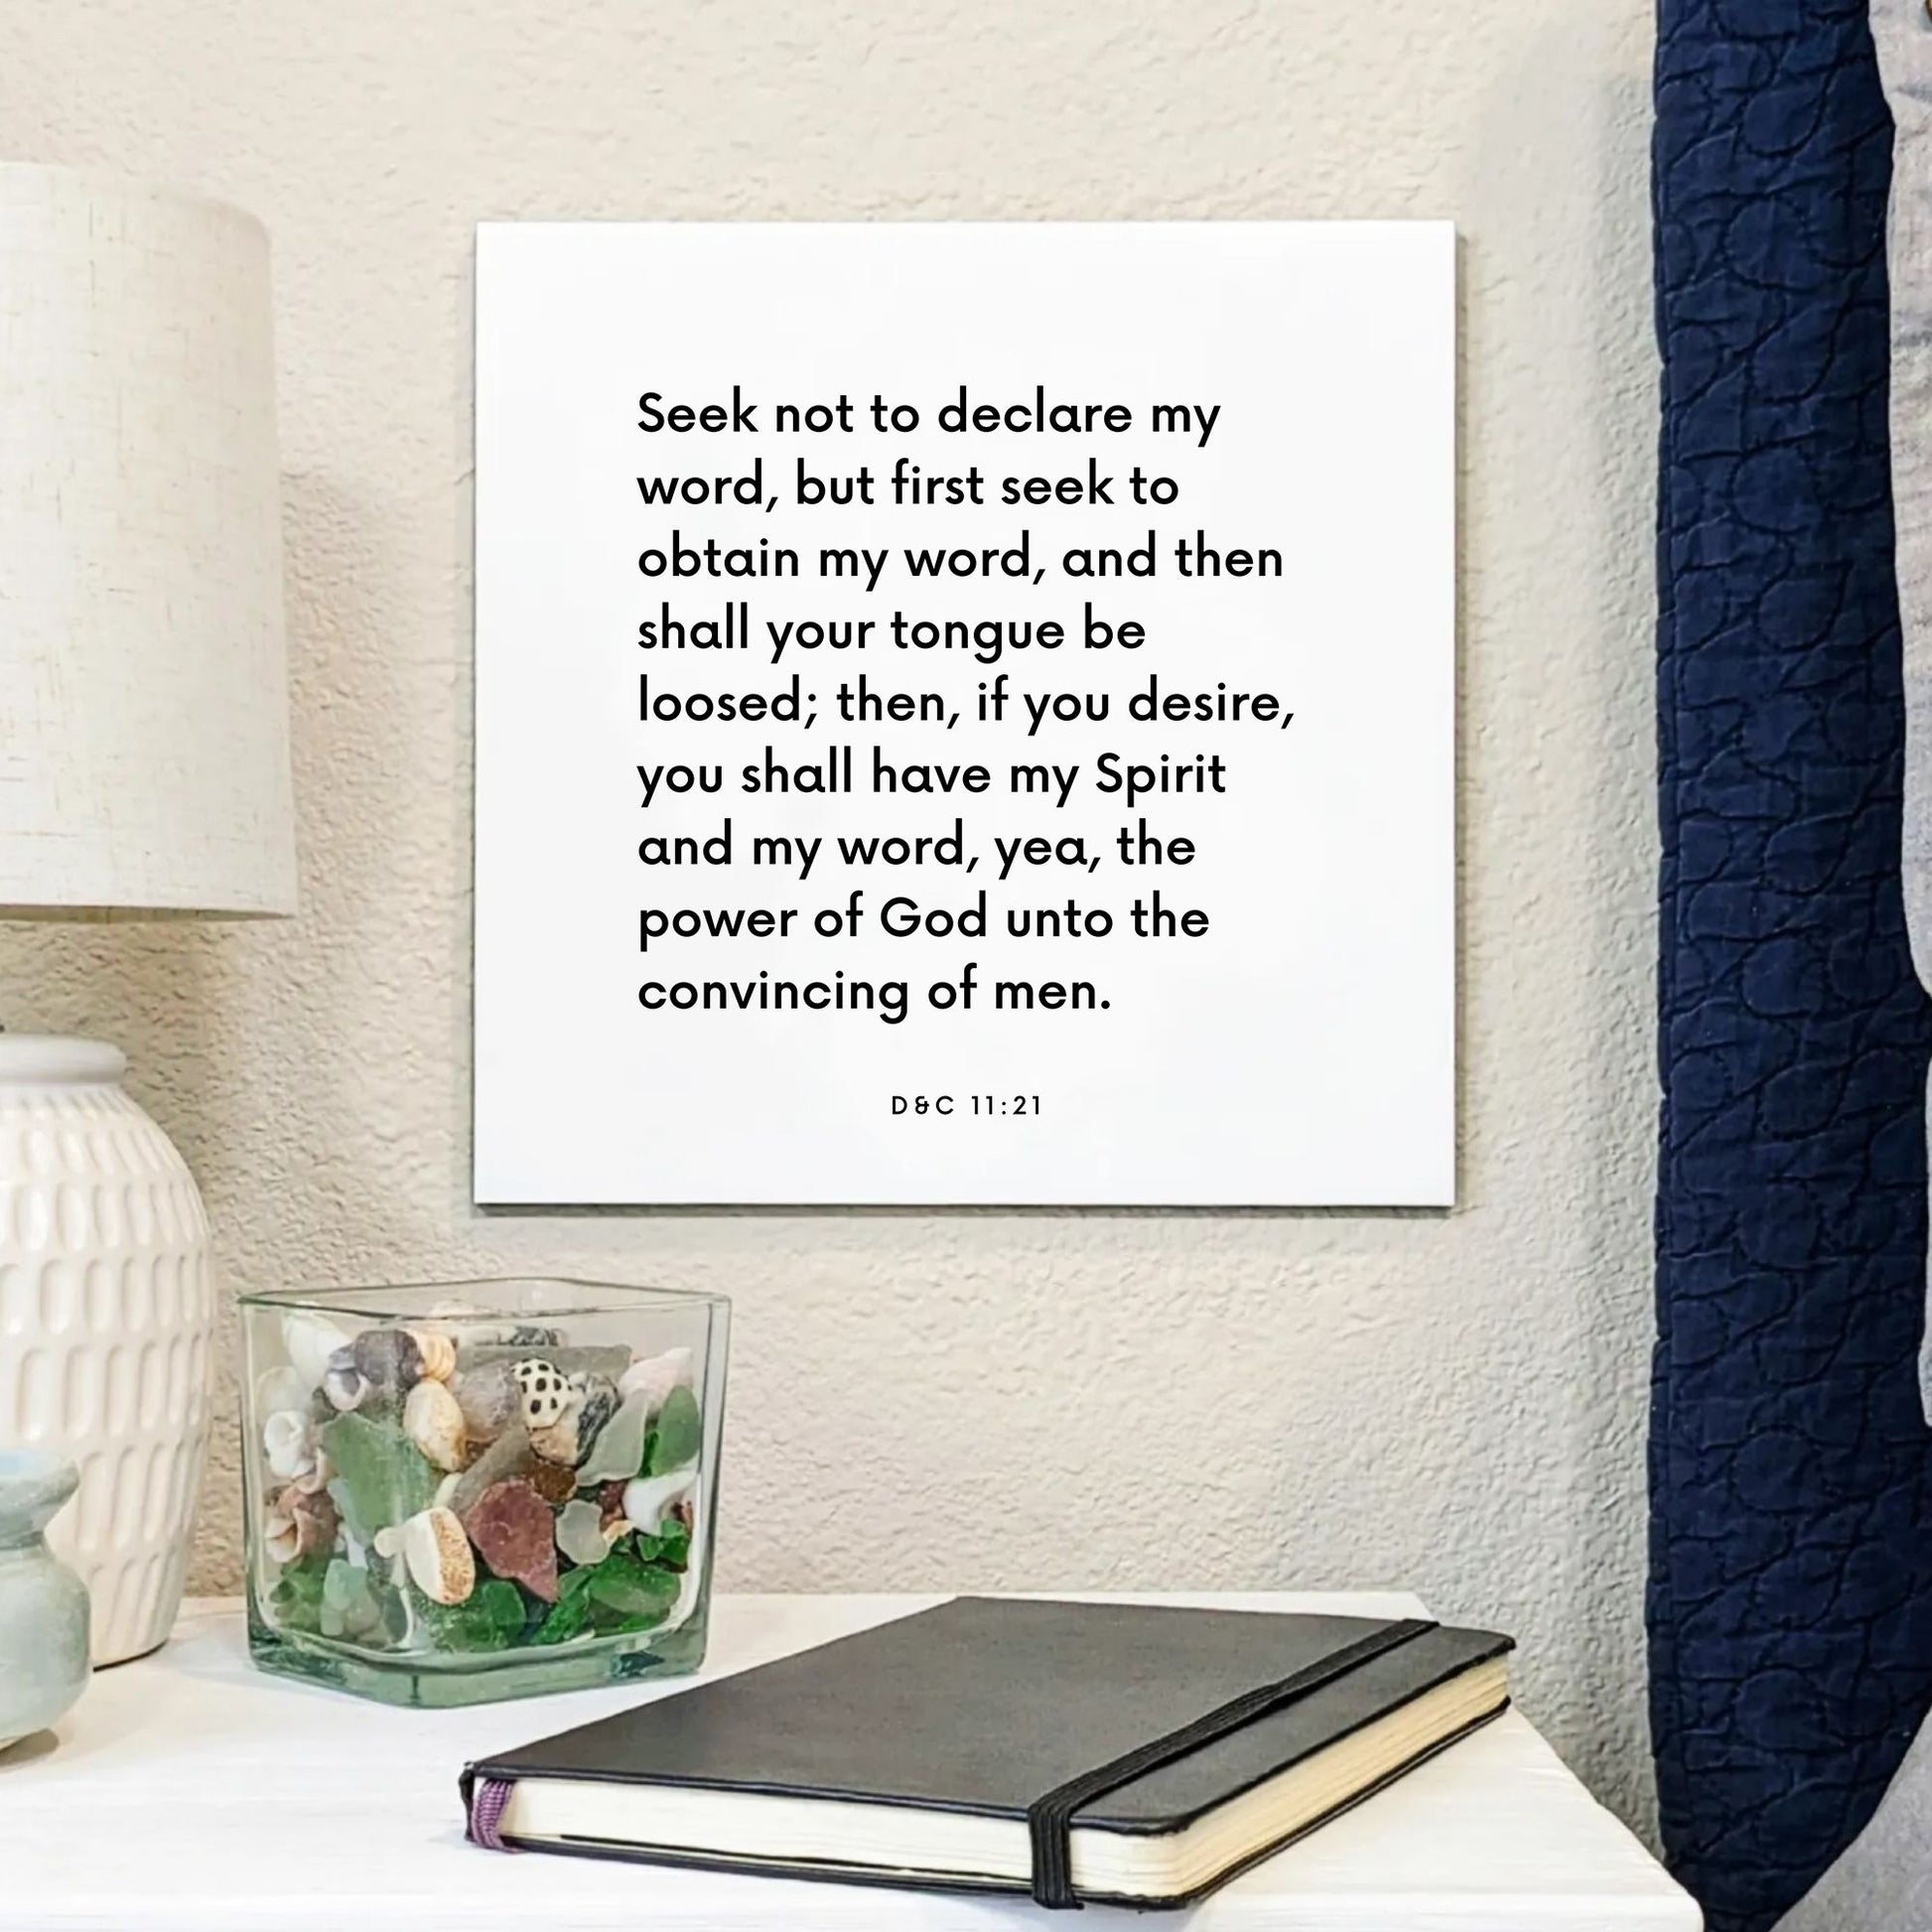 Bedside mouting of the scripture tile for D&C 11:21 - "Seek not to declare my word, but first seek to obtain my word"